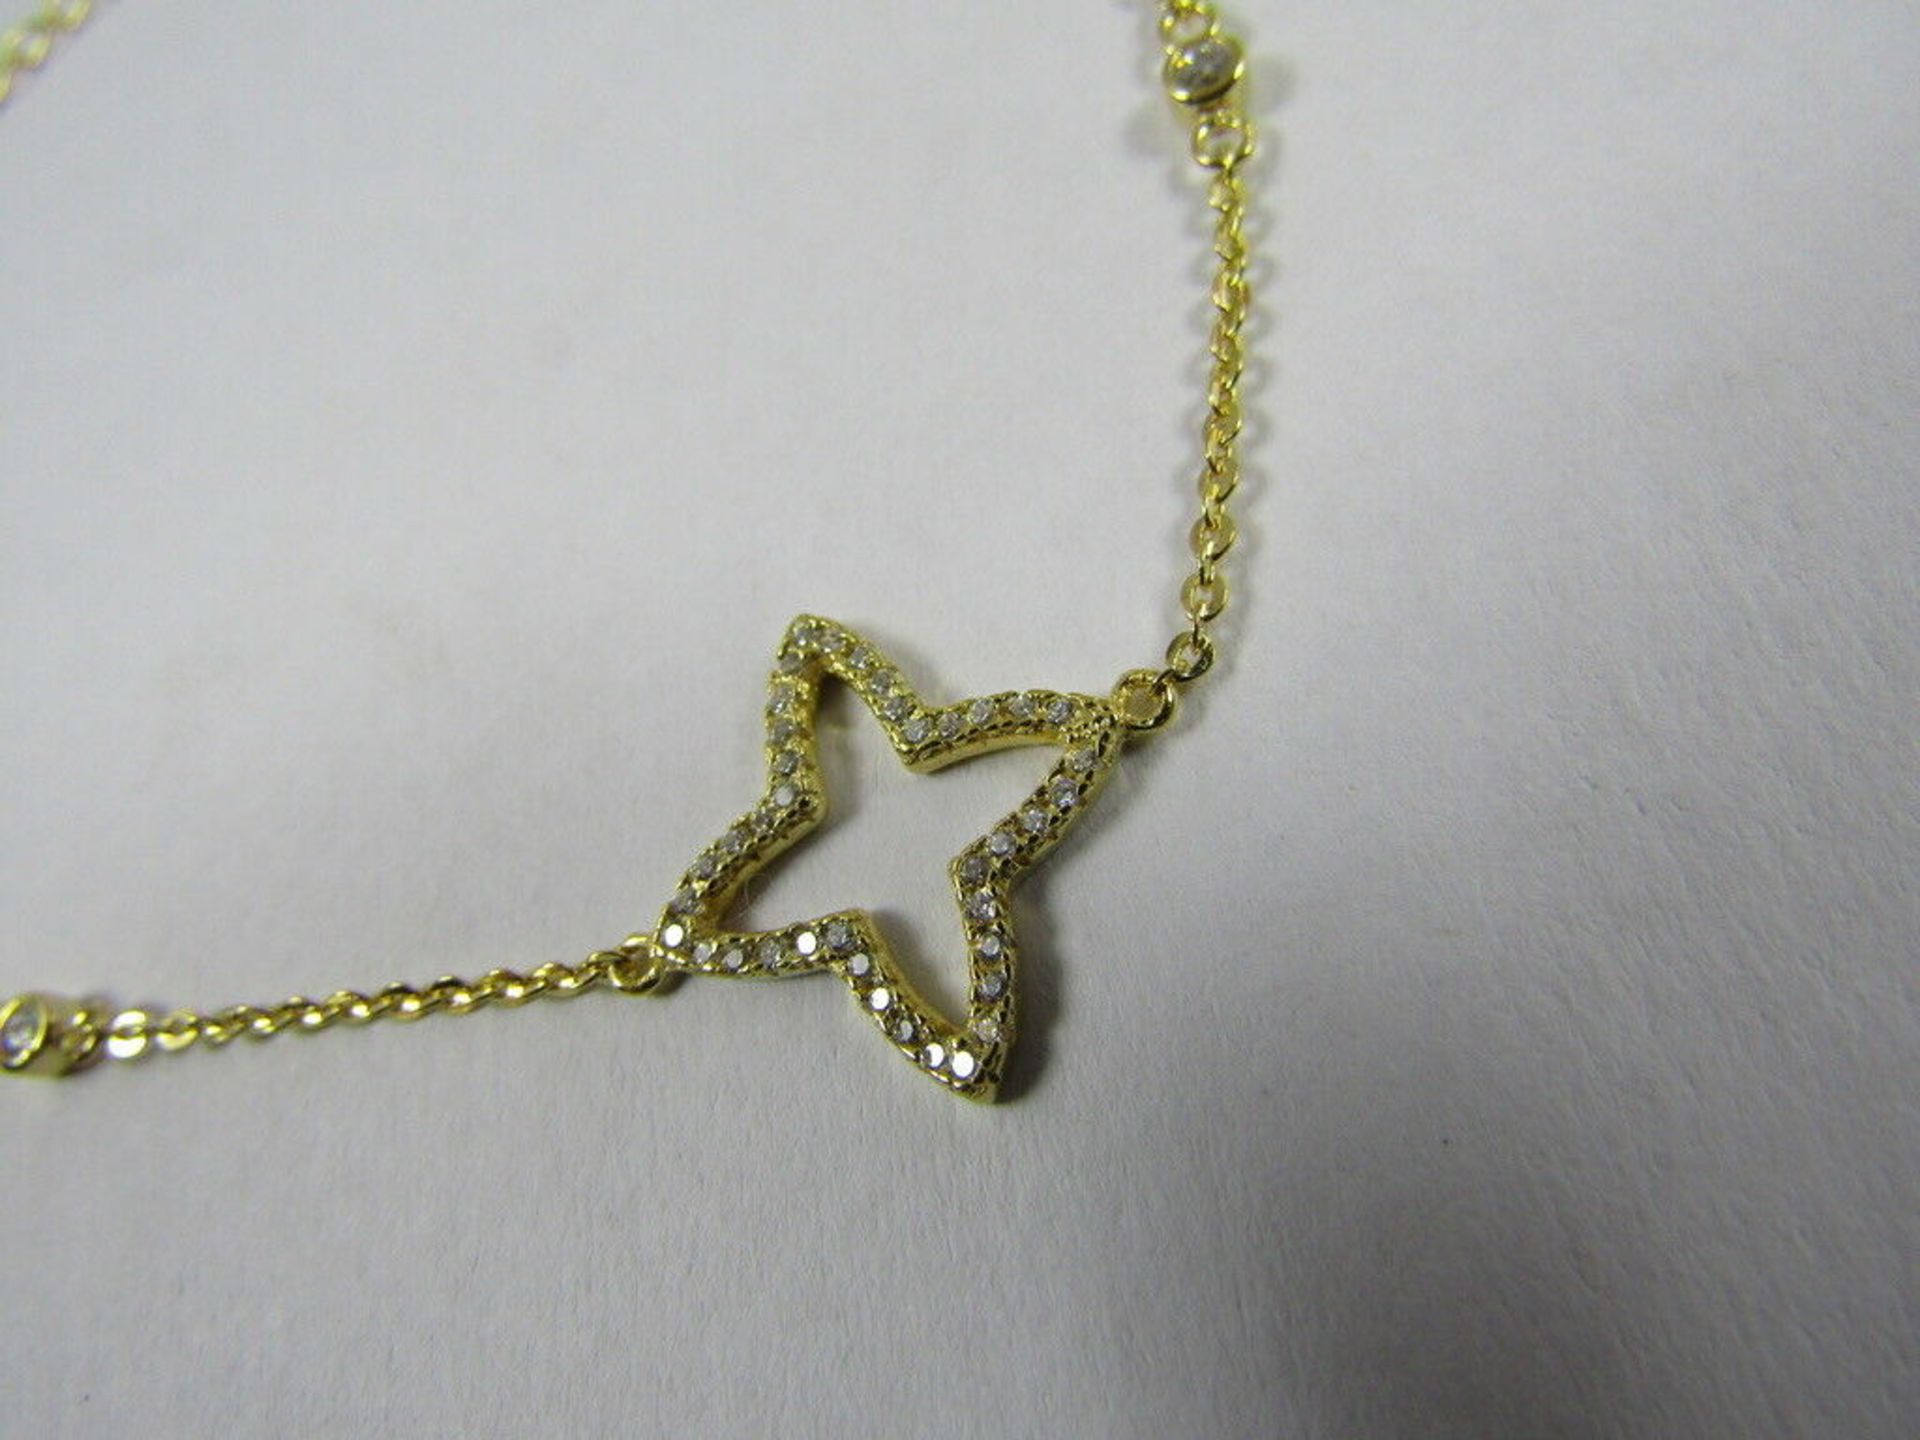 10 x ANKLE BRACELET. STAR WITH CLEAR STONES. - Image 2 of 4